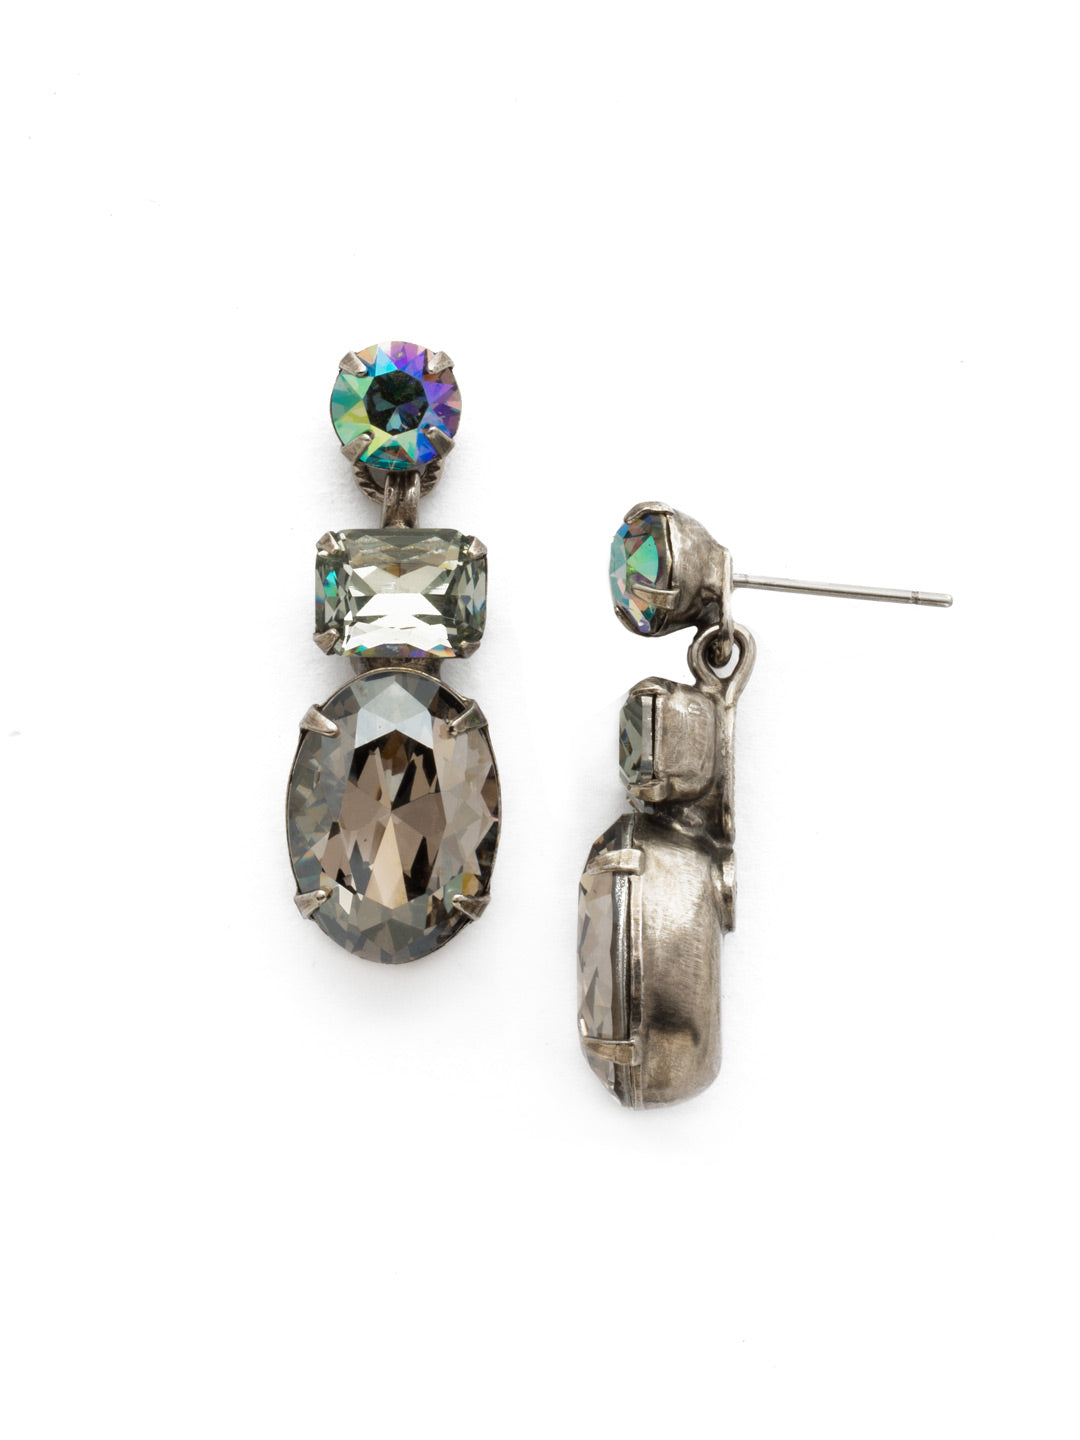 Forget-Me-Not Dangle Earring - EDQ6ASCRO - A central oval stone is highlighted by emerald and round cut crystals in this classic design. From Sorrelli's Crystal Rock collection in our Antique Silver-tone finish.